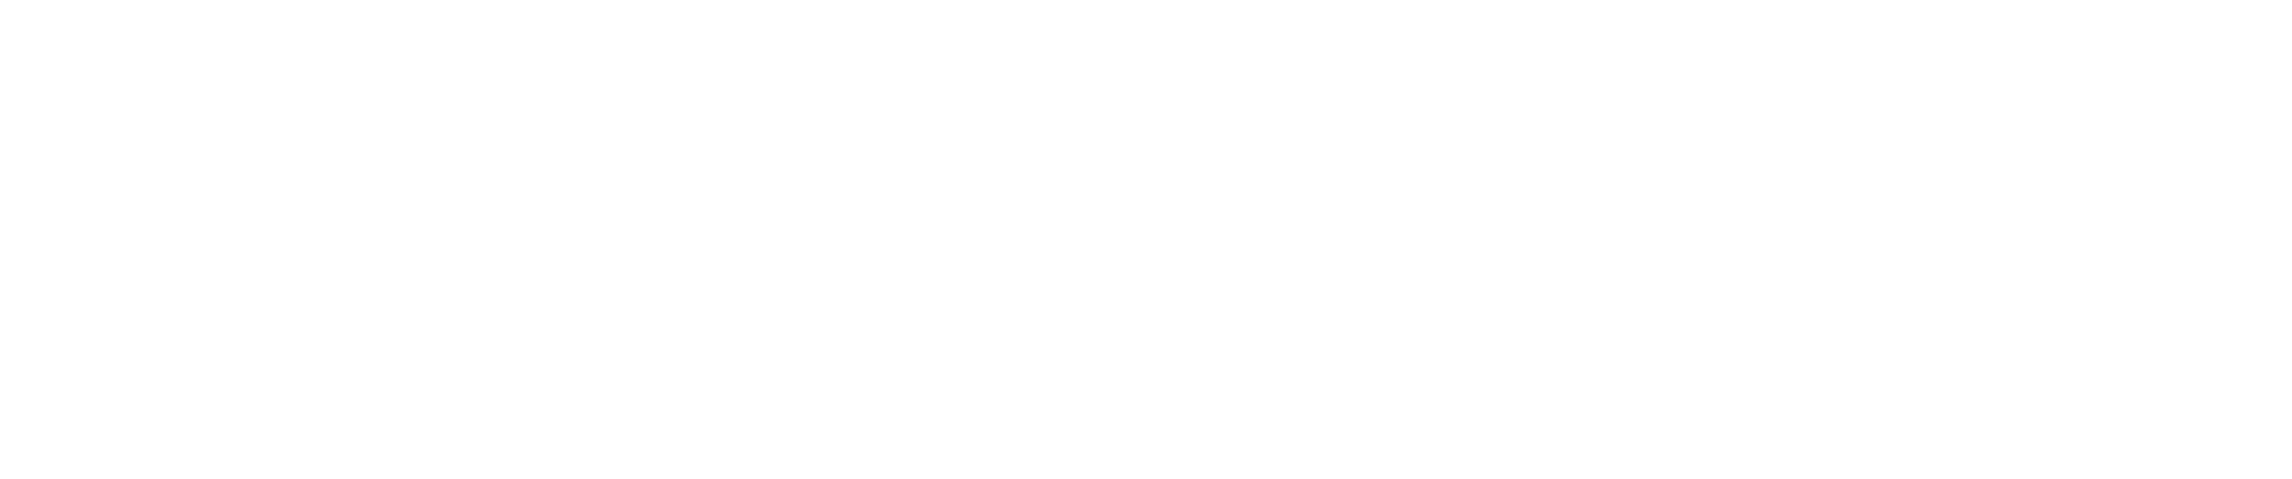 portland-monthly-logo-inverse.png